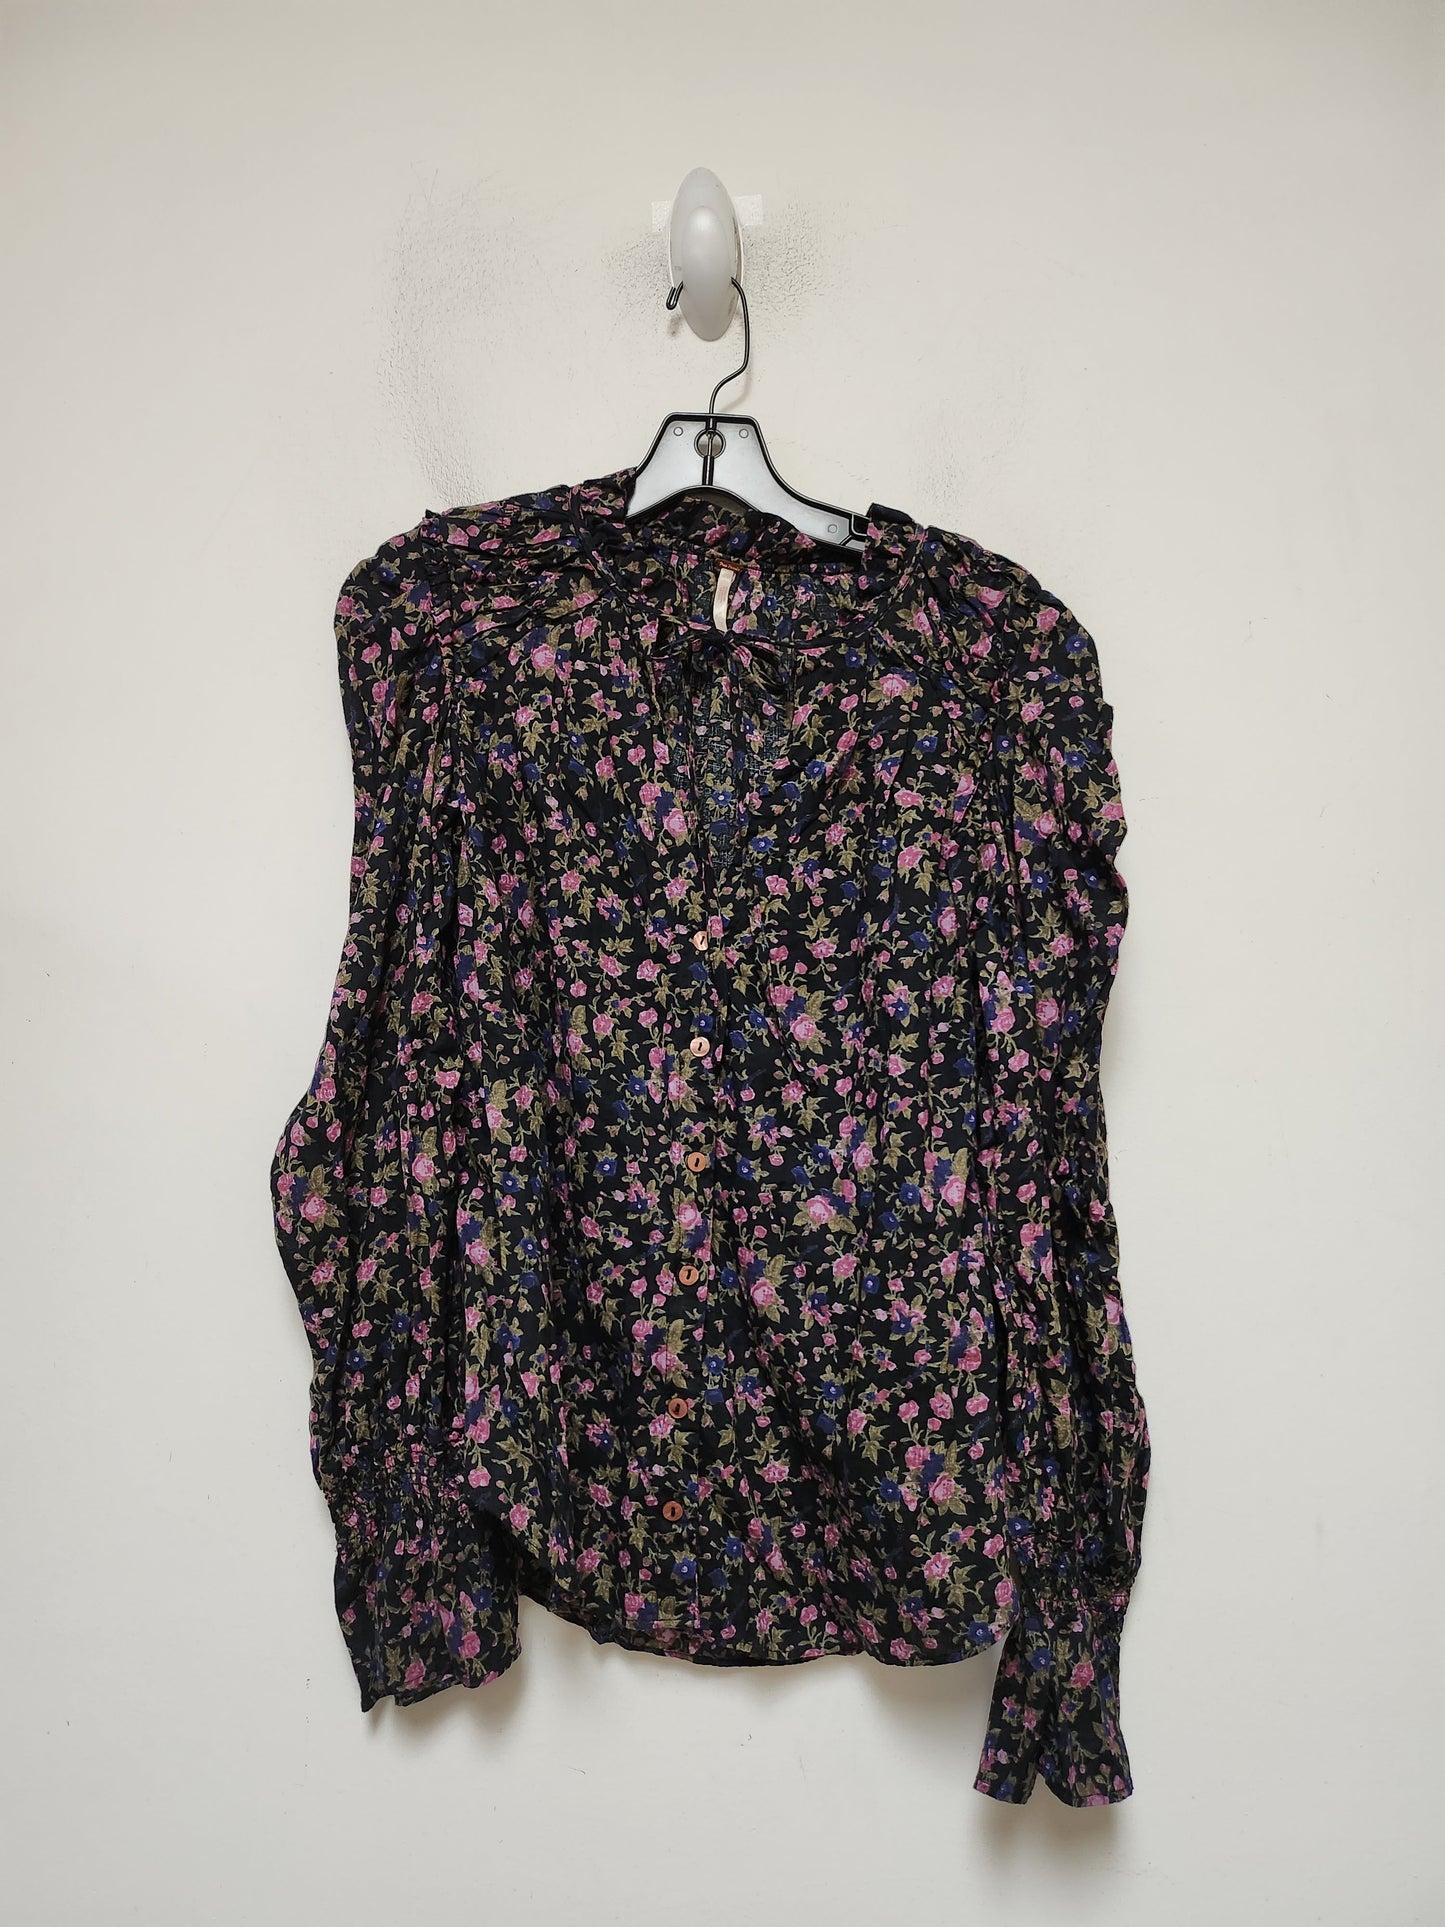 Floral Print Top Long Sleeve Free People, Size Xs